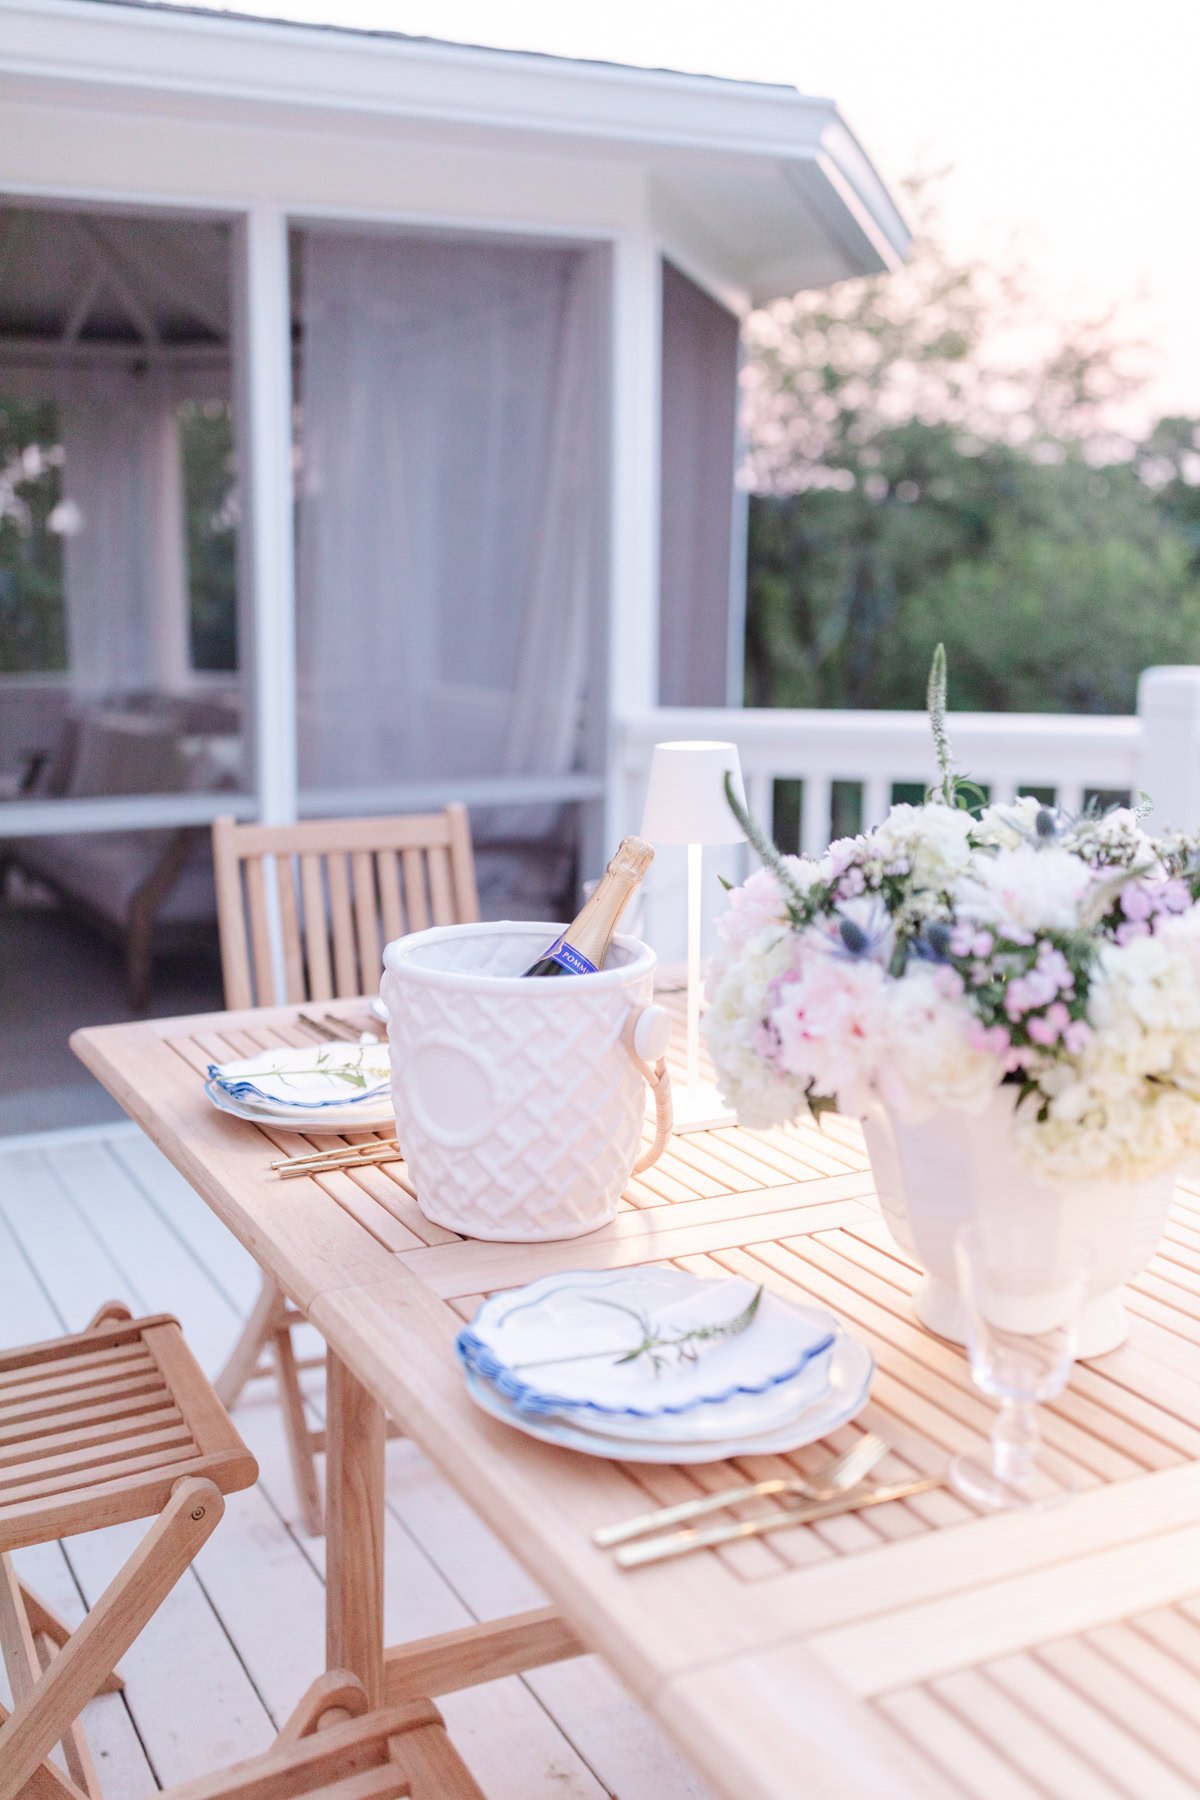 A beautifully stained wooden outdoor table set with plates, cutlery, a white flower arrangement, and a white ice bucket holding a bottle. Wooden chairs, also treated with the best deck stain for durability, are placed around the table. A charming house is in the background.